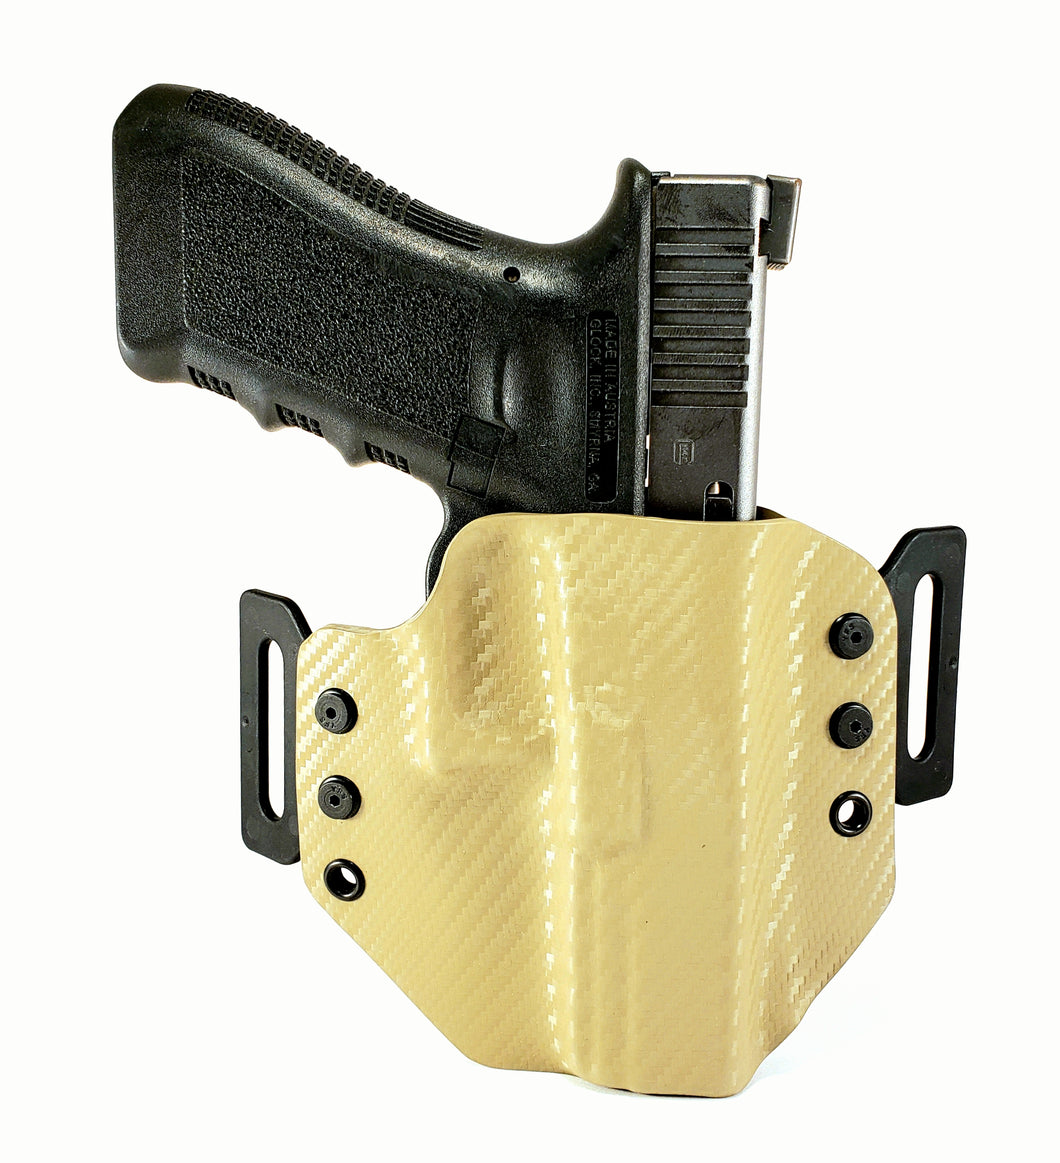 Sure-Fit O.W.B. Holster Tan Carbon (RIGHT HAND) Gun Models S-W